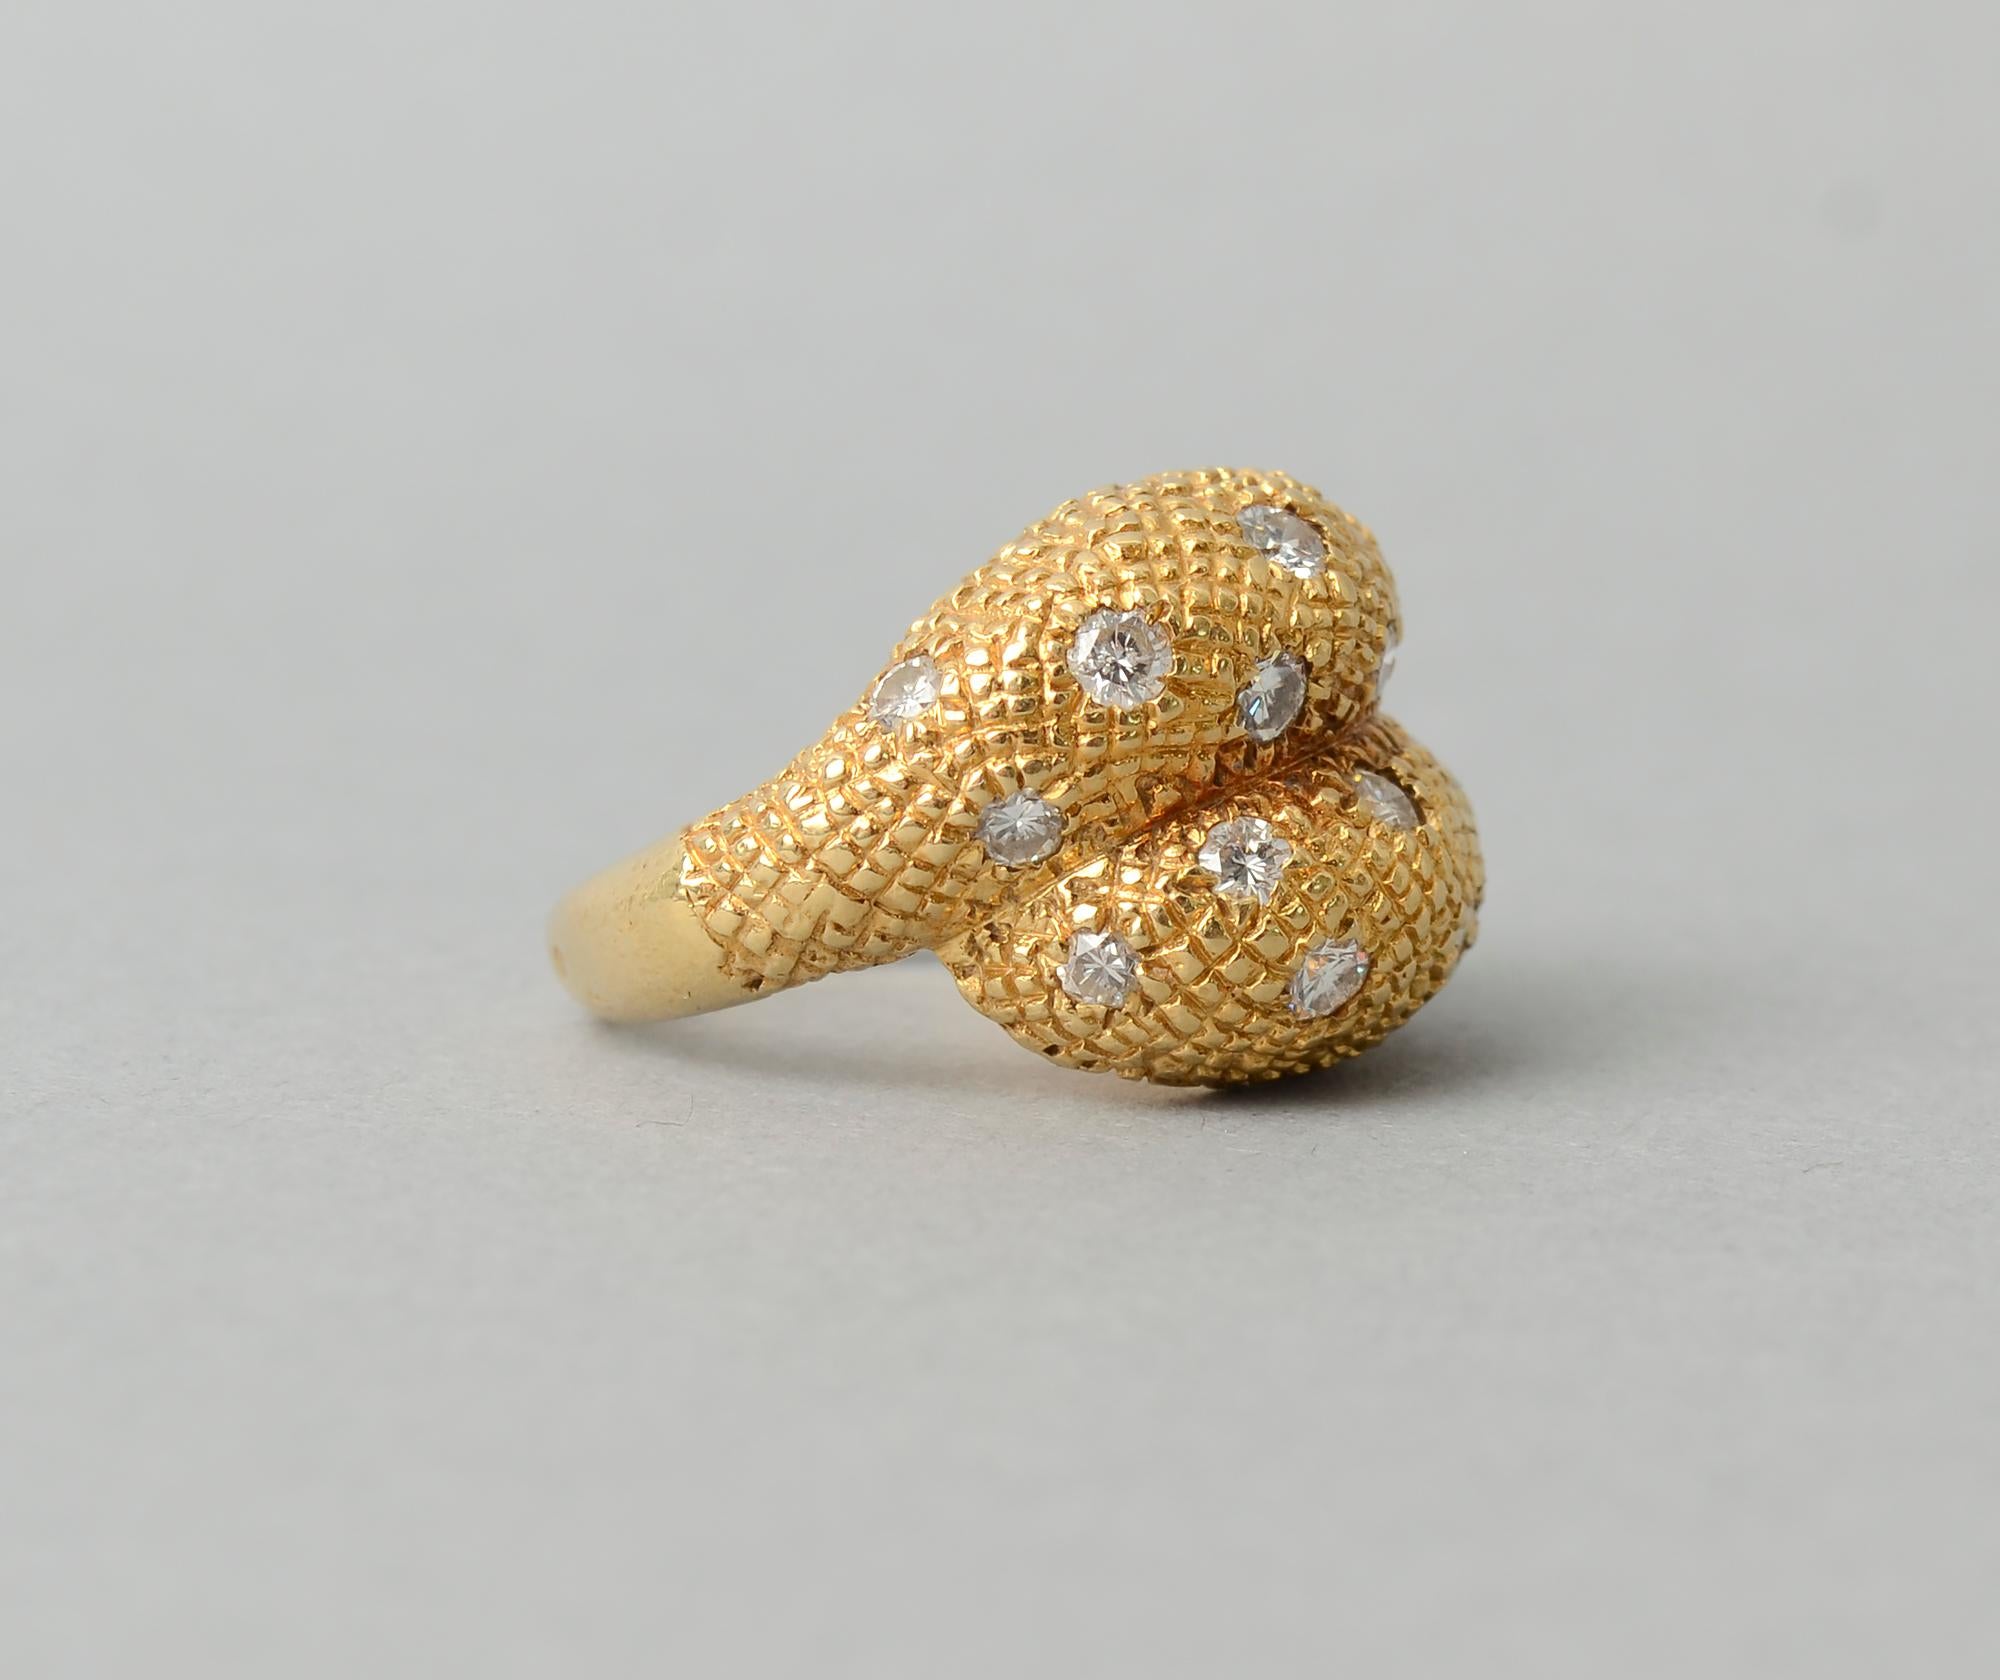 Stylish and elegant 18 karat gold cocktail ring by Van Cleef and Arpels France. The beautifully textured crossover ring has 18 diamonds that weigh a total of approximately 1.8 carats.
The ring is size 5 1/4. It can easily be sized up or down.